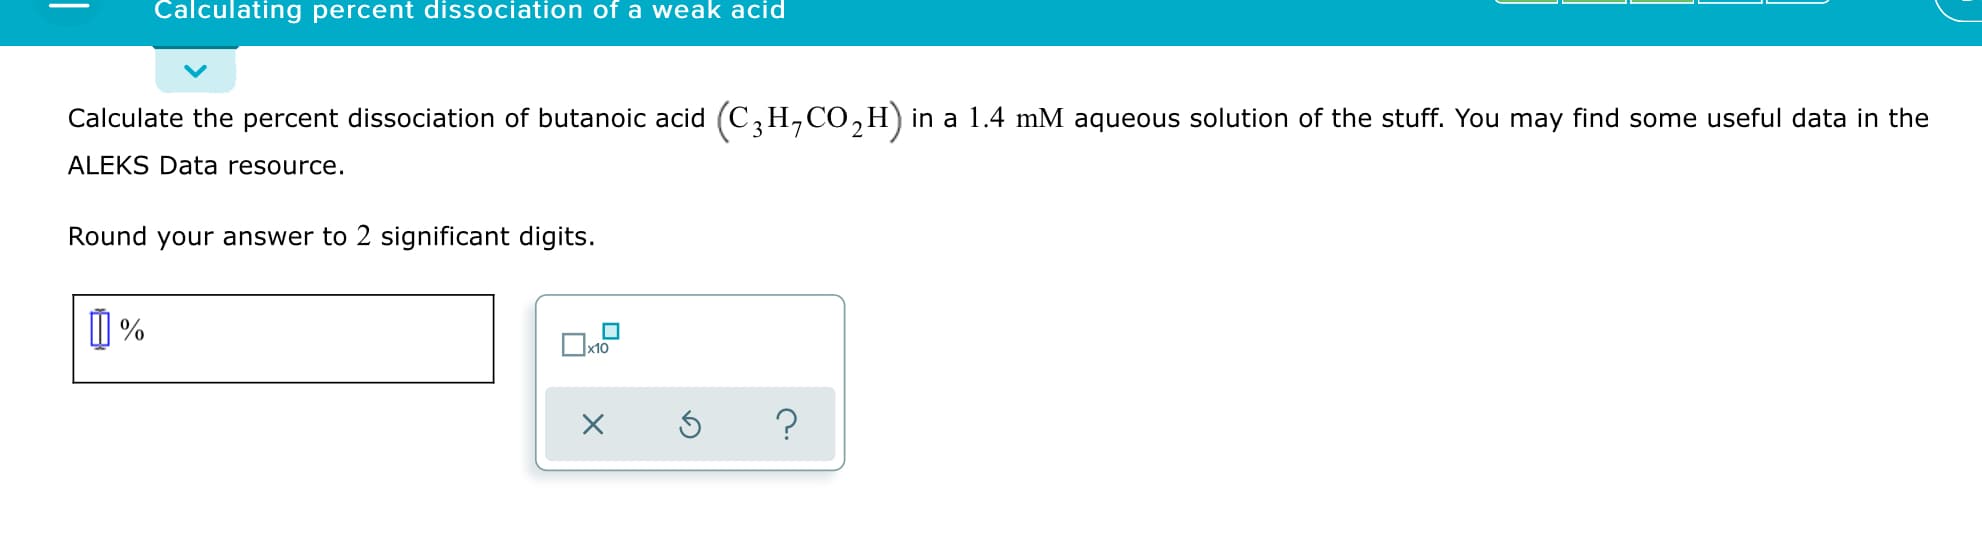 Calculating percent dissociation of a weak acid
Calculate the percent dissociation of butanoic acid (C,H,CO,H) in a 1.4 mM aqueous solution of the stuff. You may find some useful data in the
ALEKS Data resource.
Round your answer to 2 significant digits.
x10
